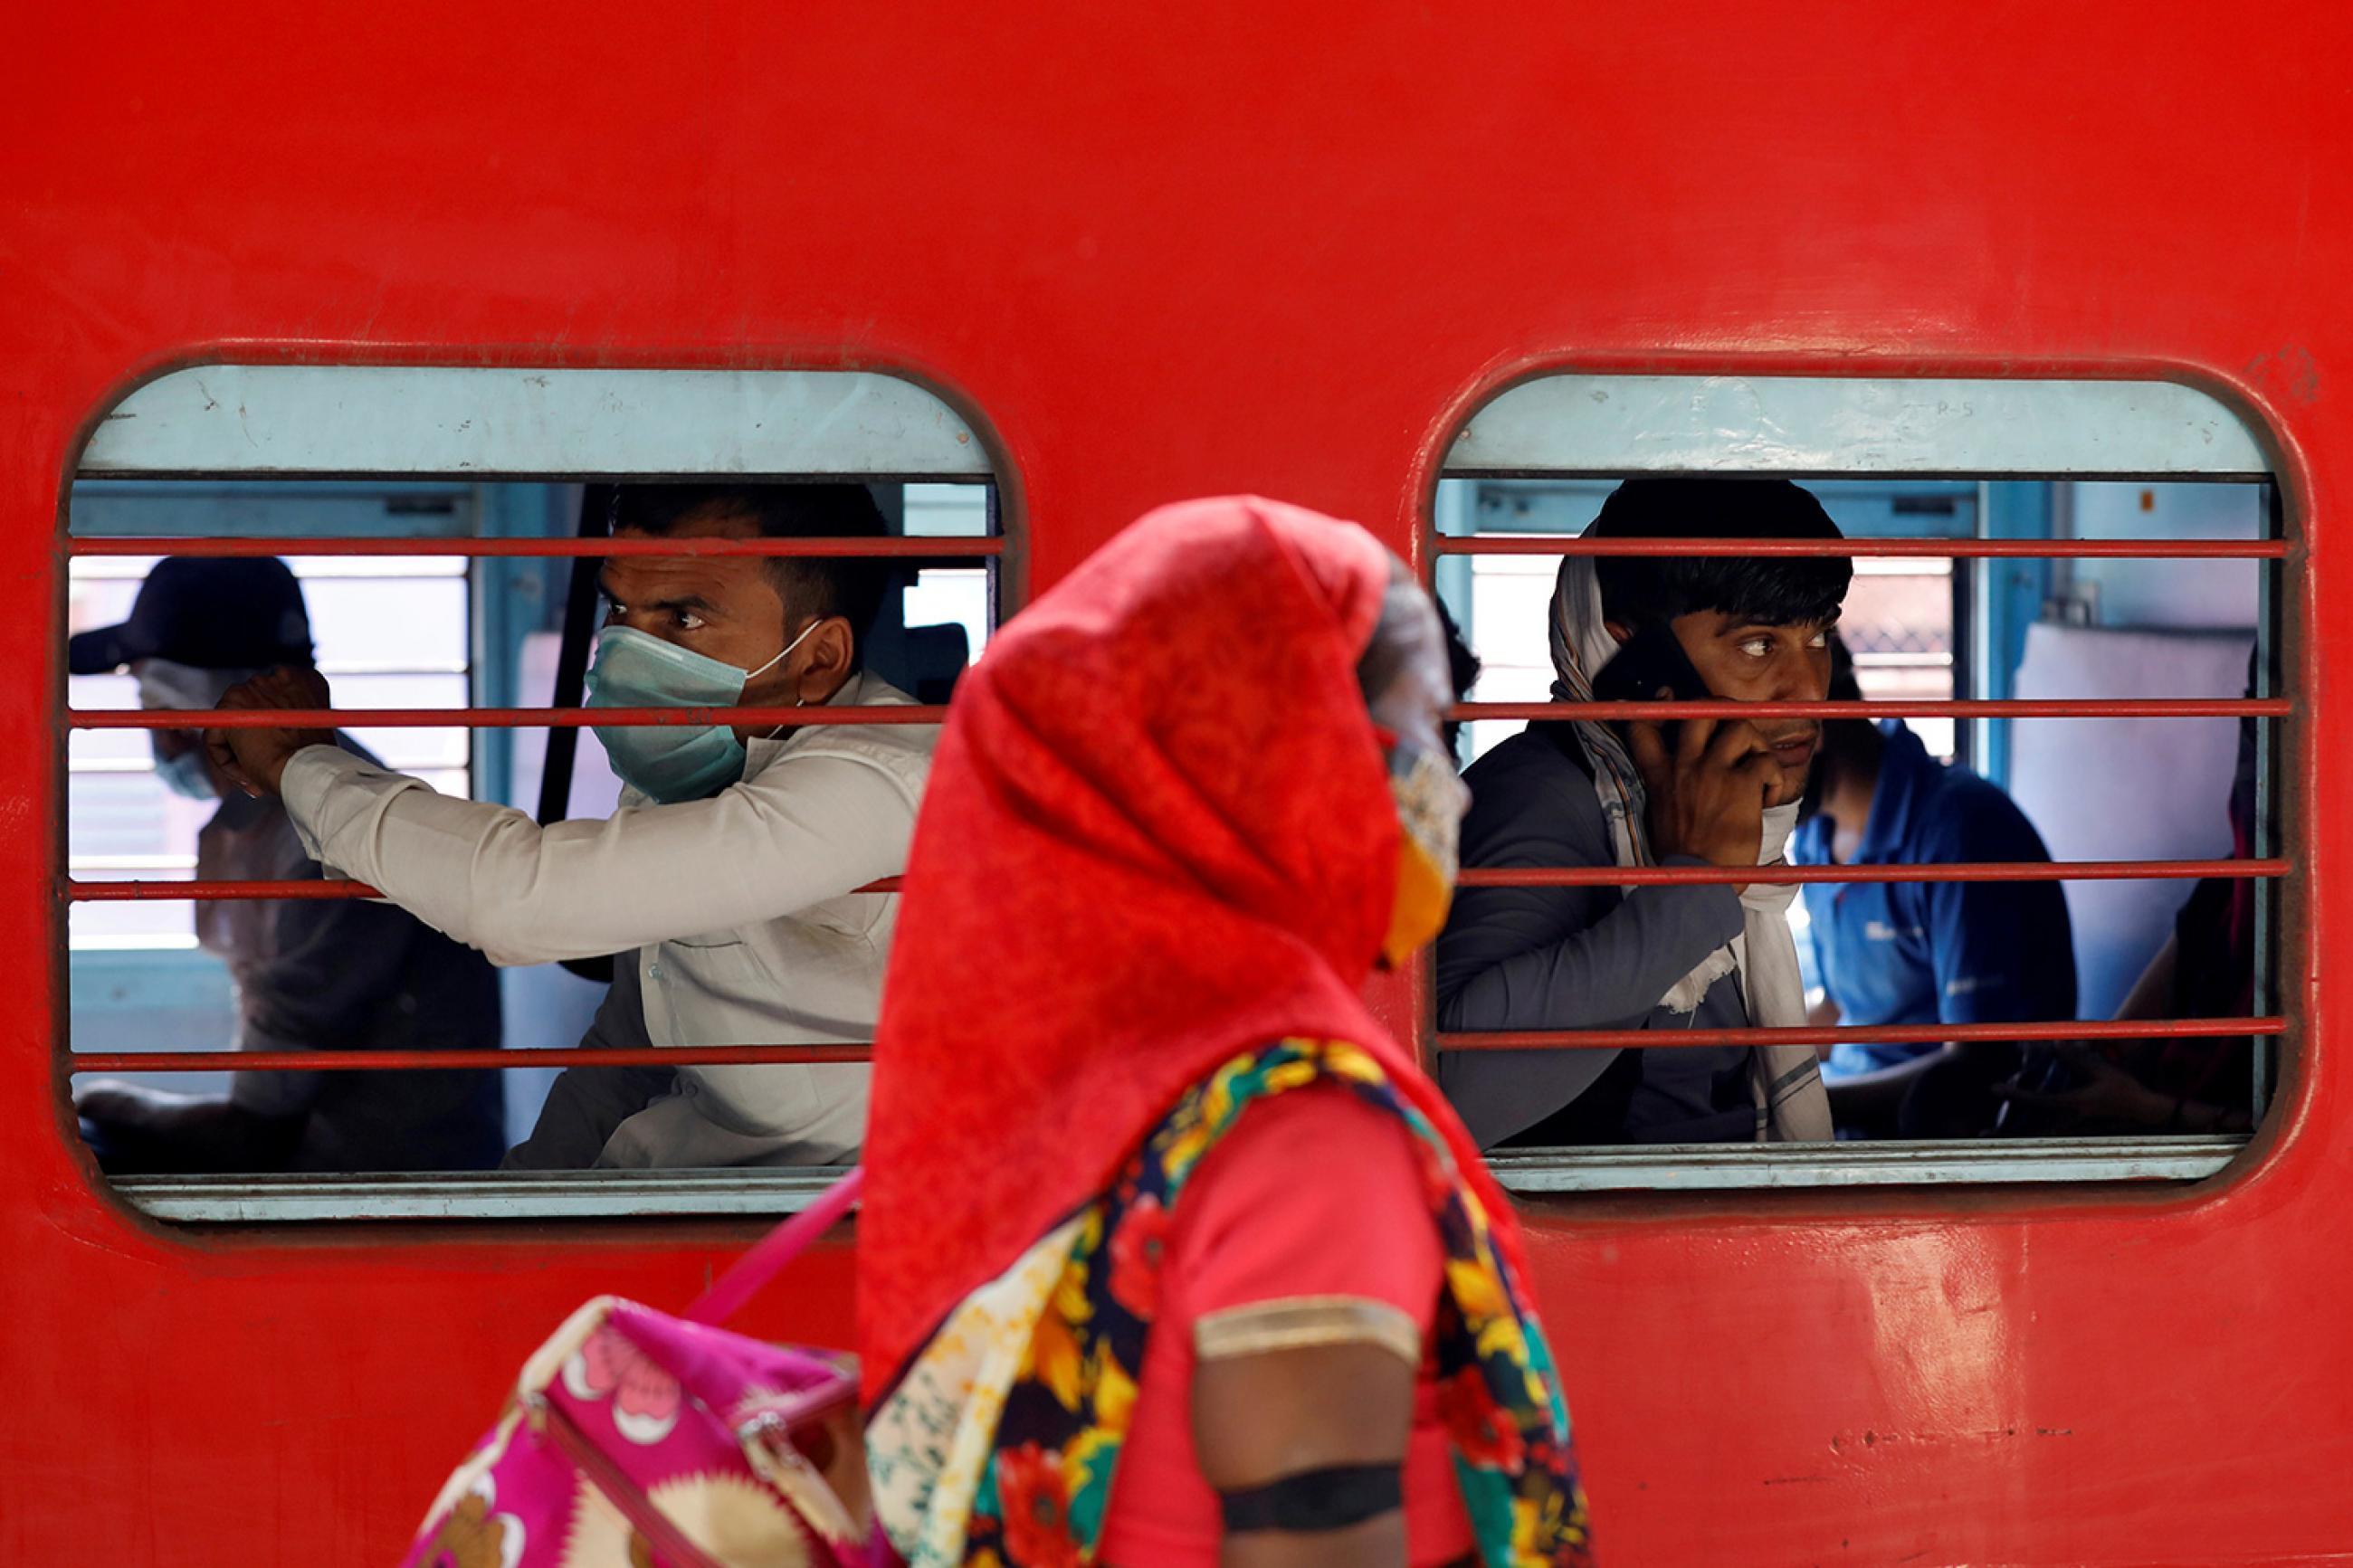 Migrant workers, who were stranded in the western state of Gujarat due to a government lockdown, inside a train as they leave for their homes in Ahmedabad, India, on May 2, 2020. The image shows a bright red train with people inside and a woman walking by the train outside. REUTERS/Amit Dave 